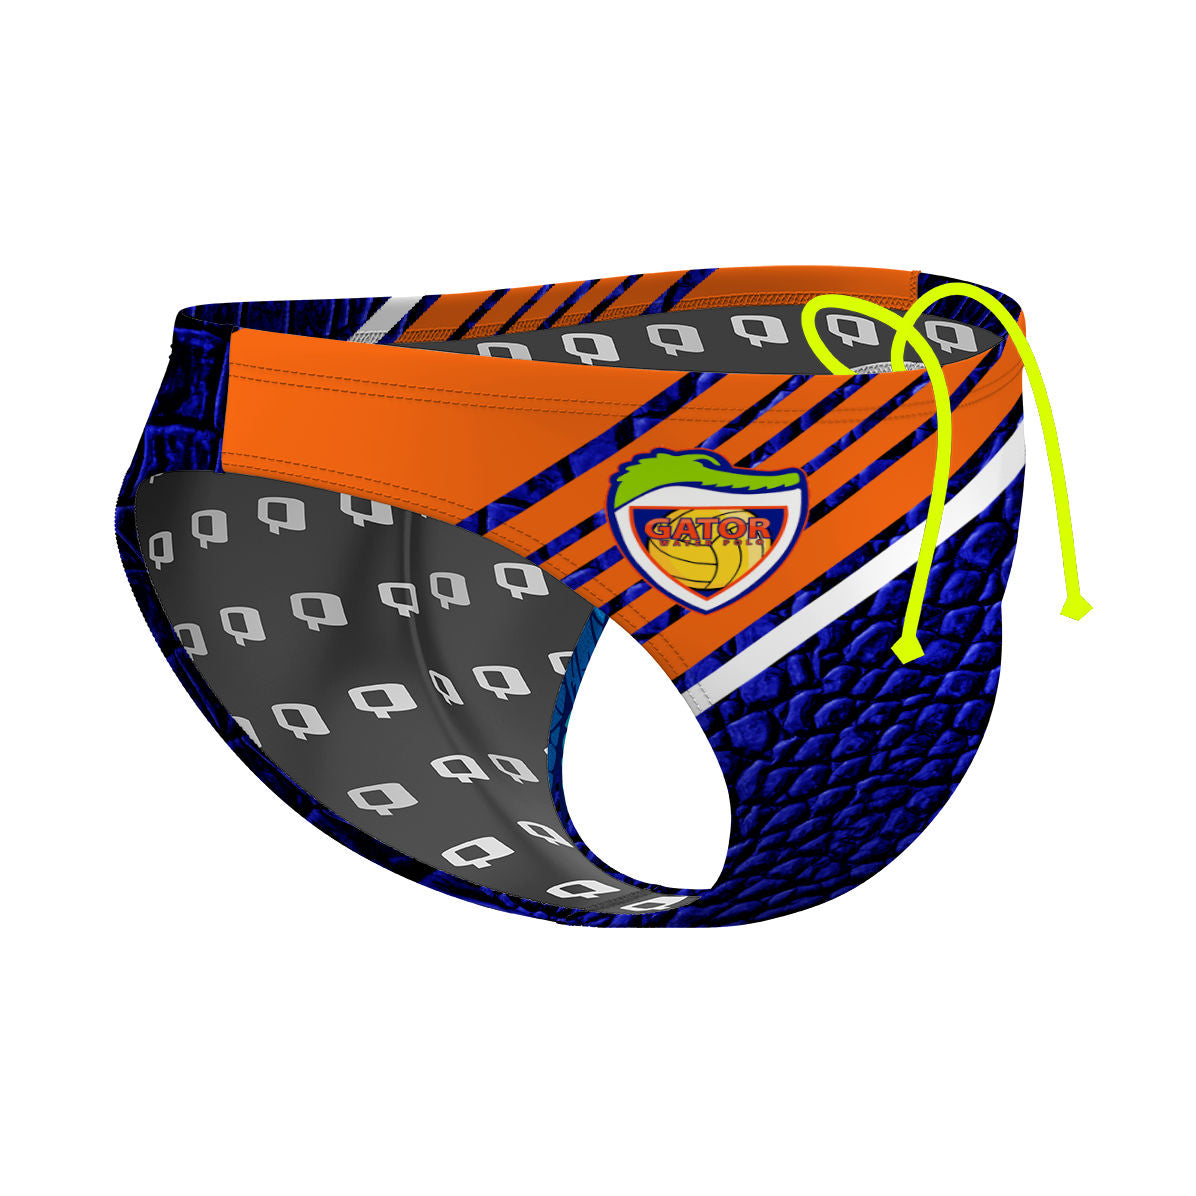 Gator Waterpolo - Waterpolo Brief Swimsuit